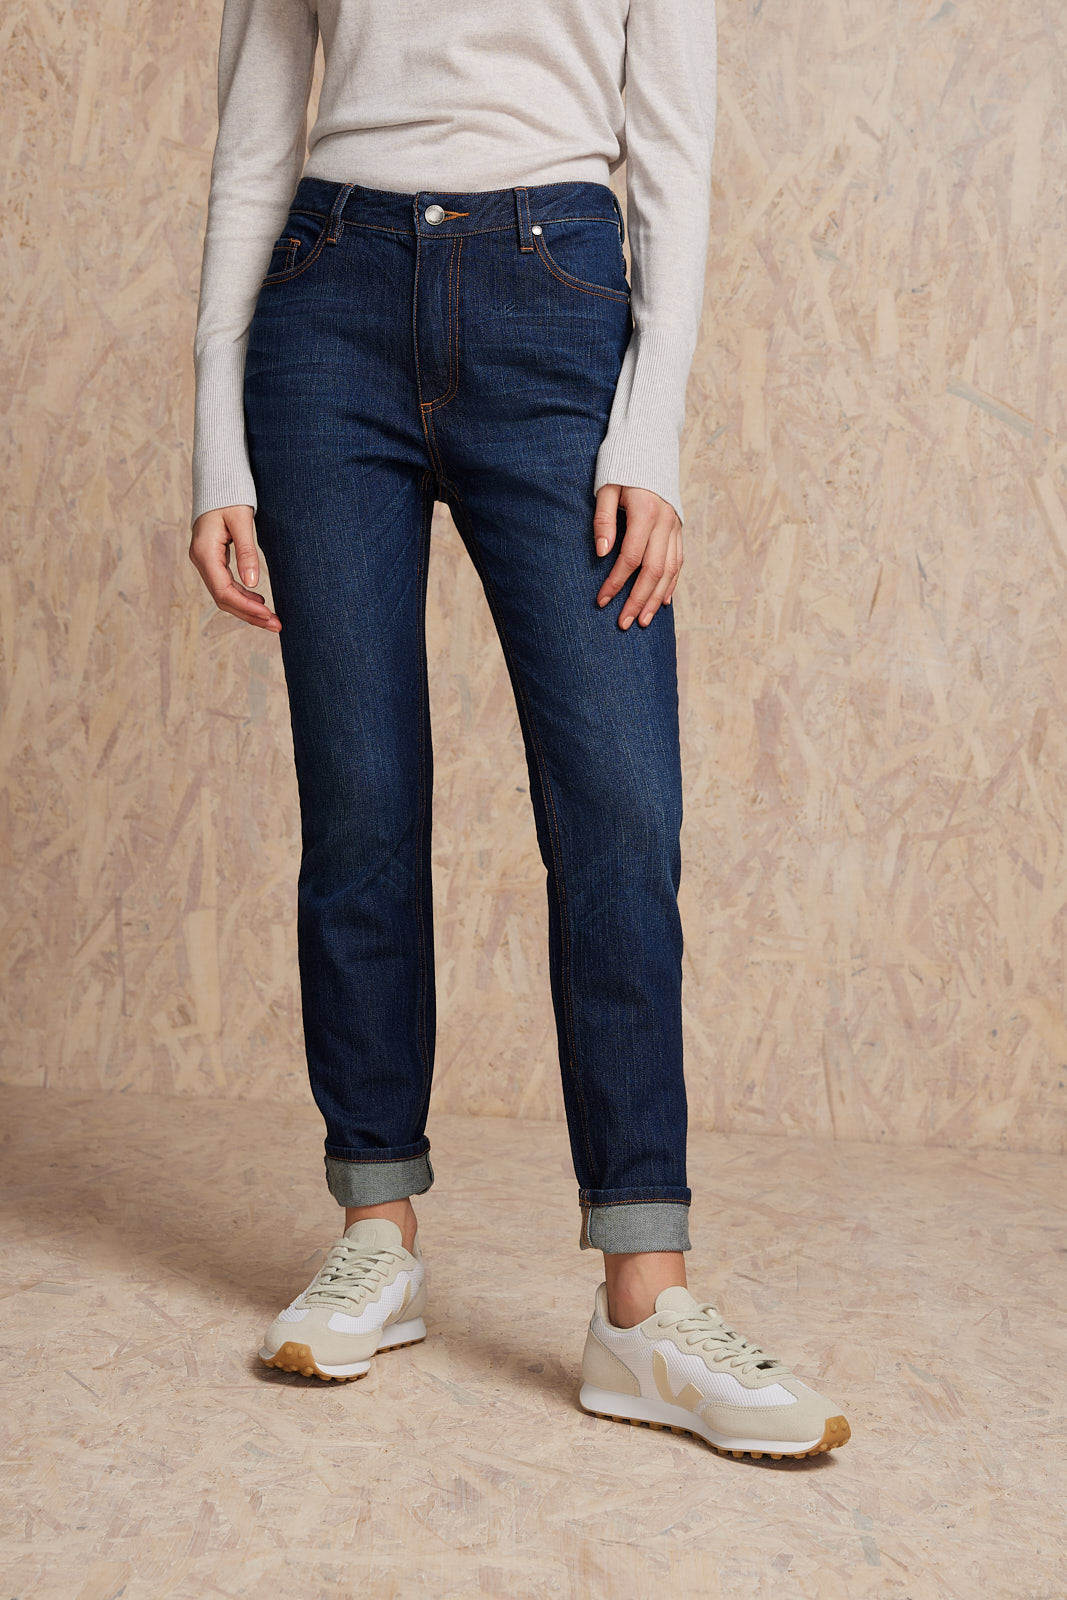 TOORALLIE MERINO PERON RELAXED FIT JEAN